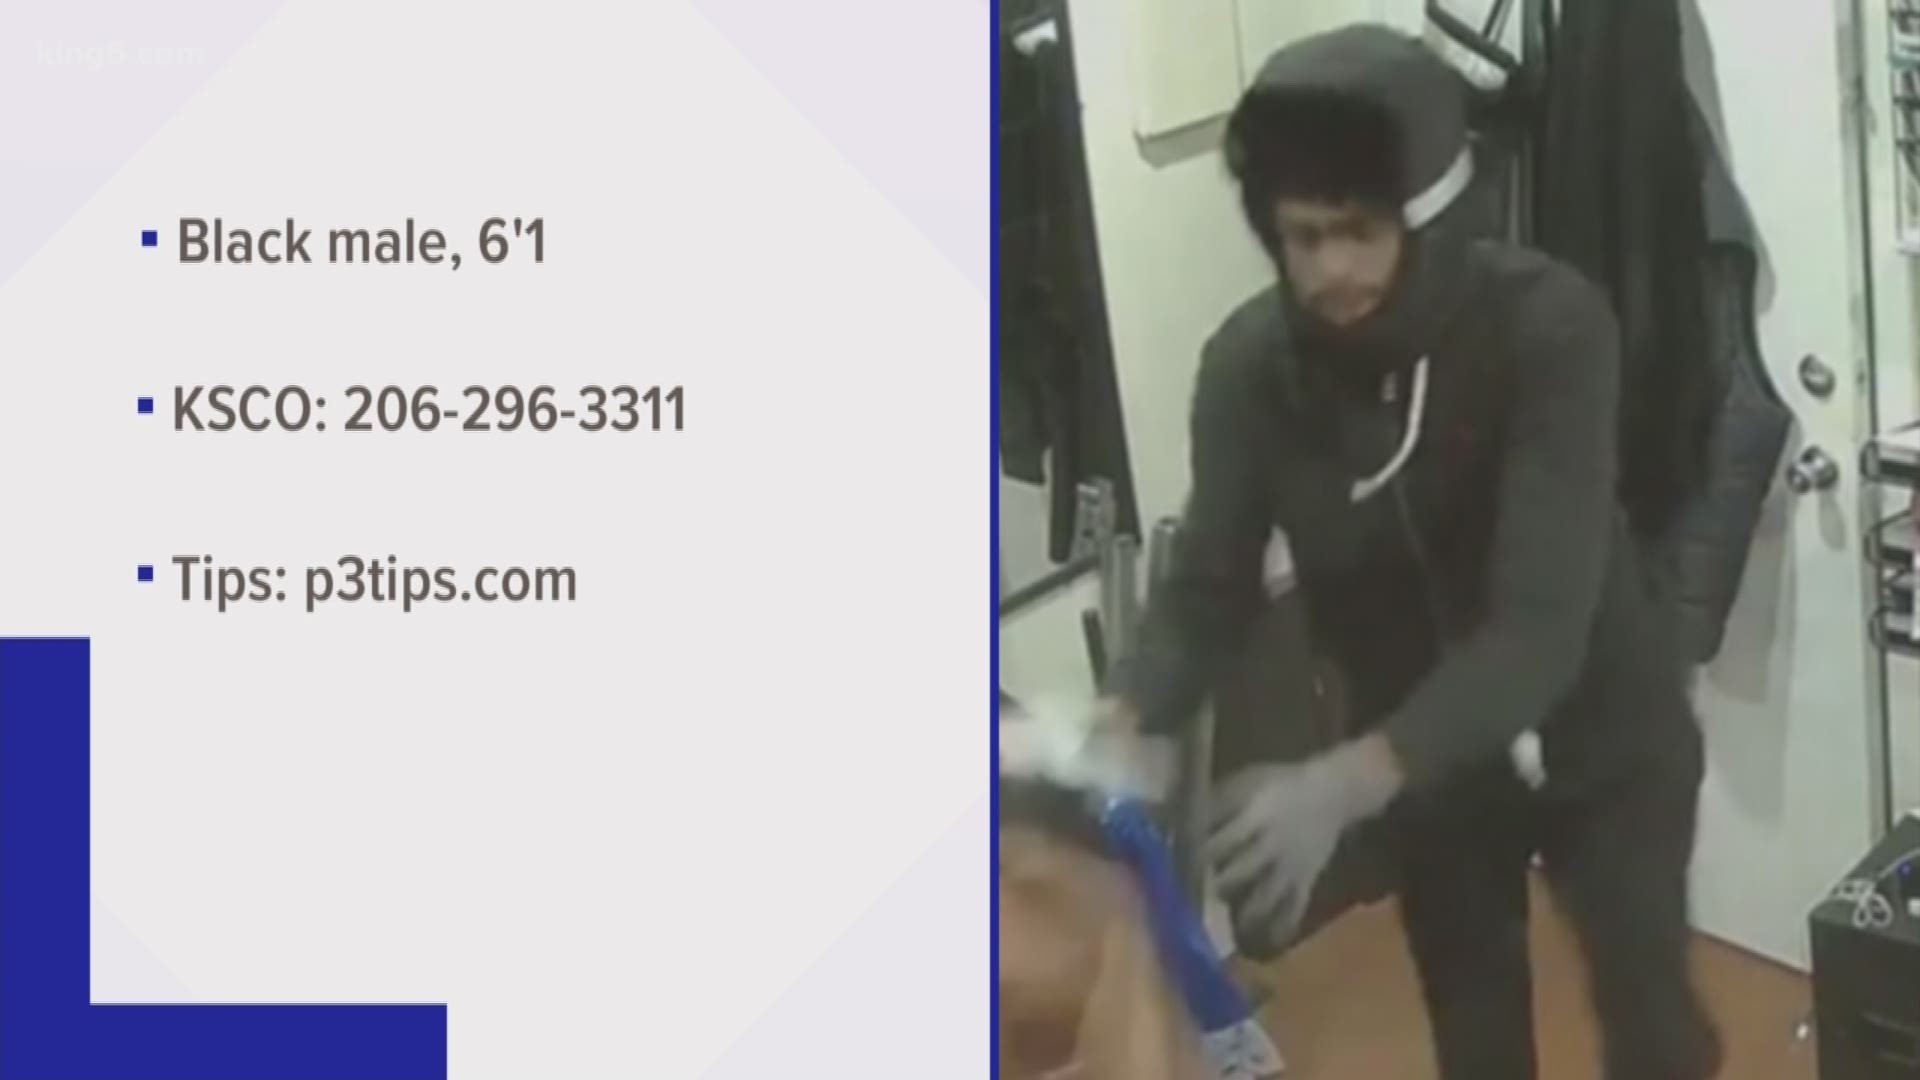 Deputies are looking for a man who assaulted an employee and robbed the pizza shop.